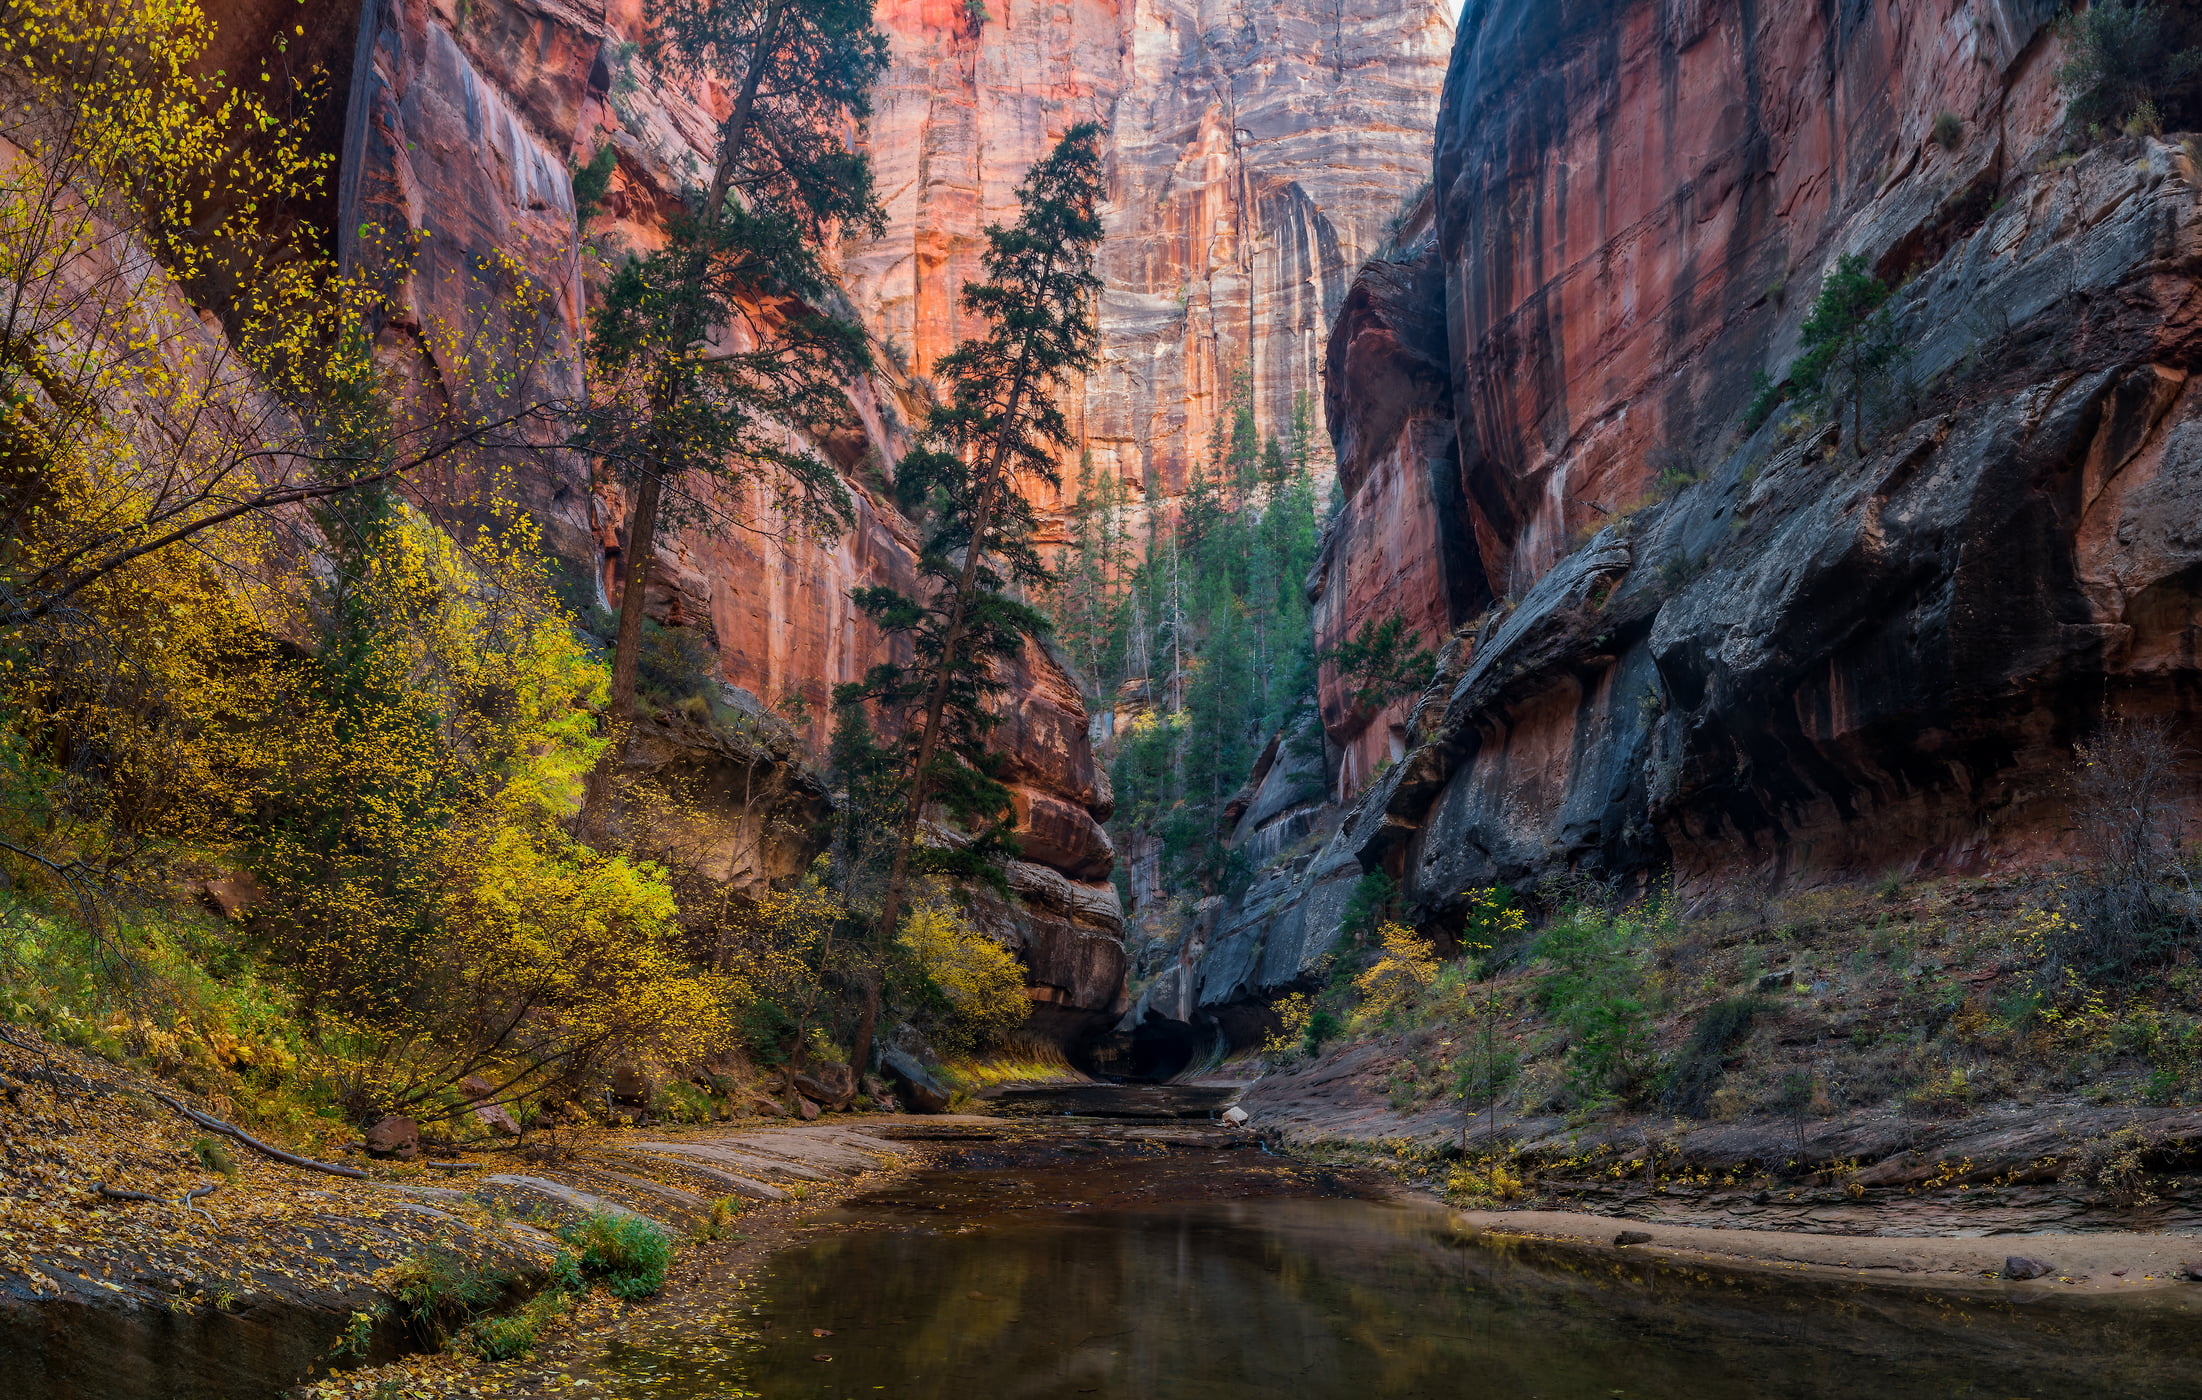 130 megapixels! A very high resolution, large-format VAST photo print of a stream in a canyon in autumn; nature photograph created by Phillip Noll in Zion National Park, Utah.